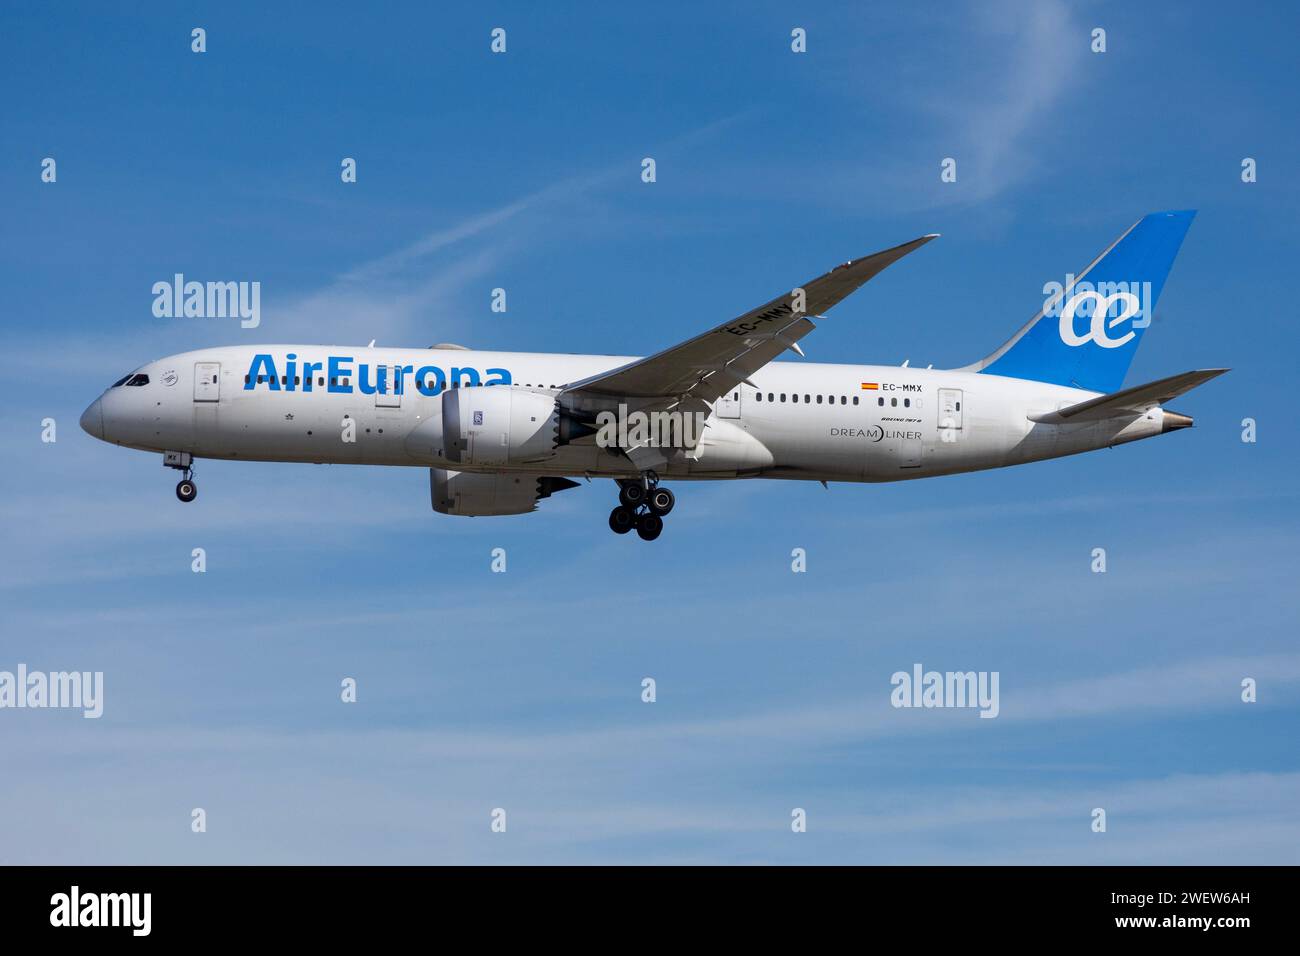 Boeing 787 wide-body airliner of Air Europa airline landing Stock Photo